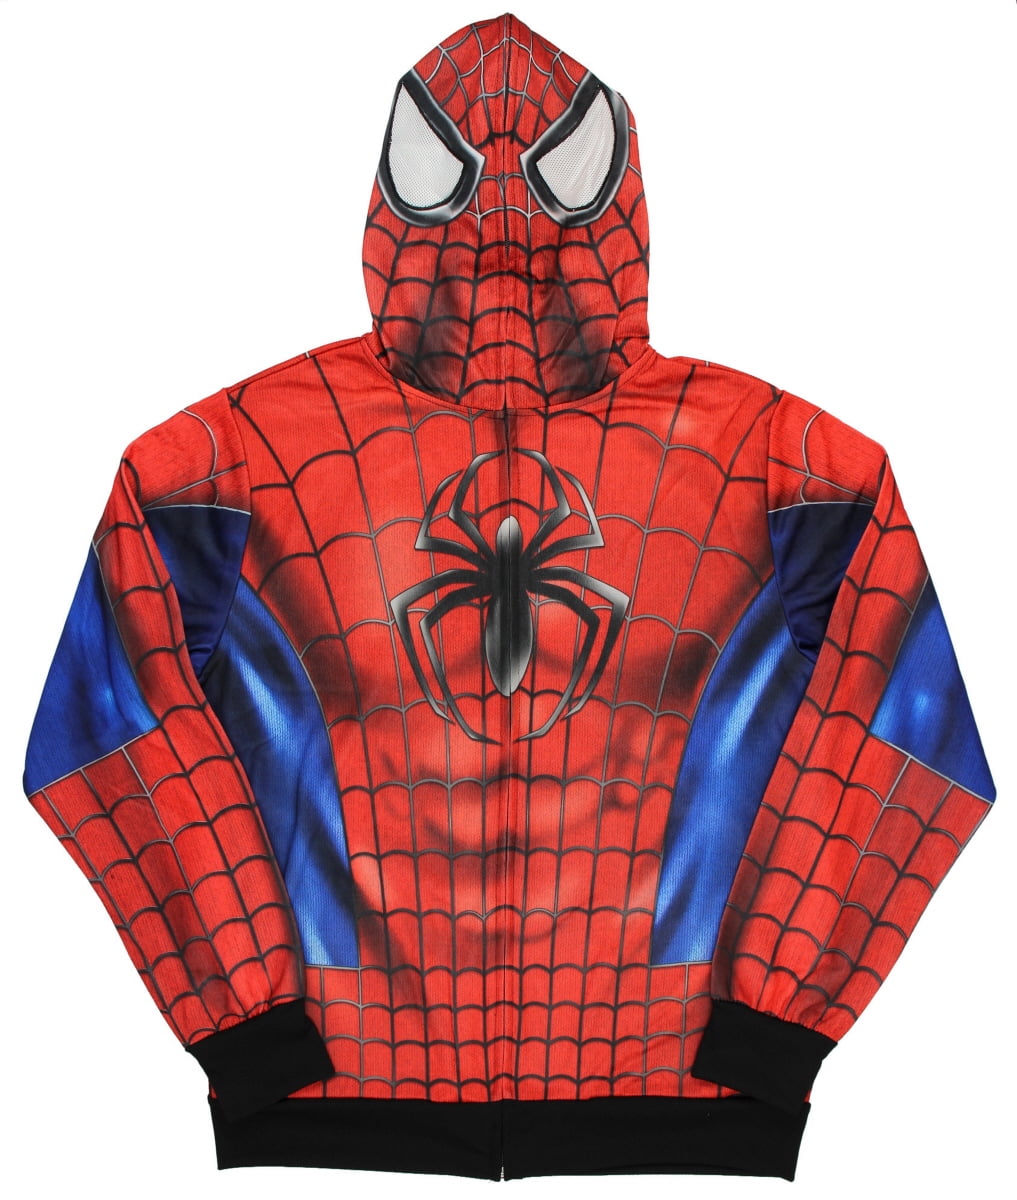 Marvel Spider-Man Hoodie Men's Costume Sublimated Full Zipper With 